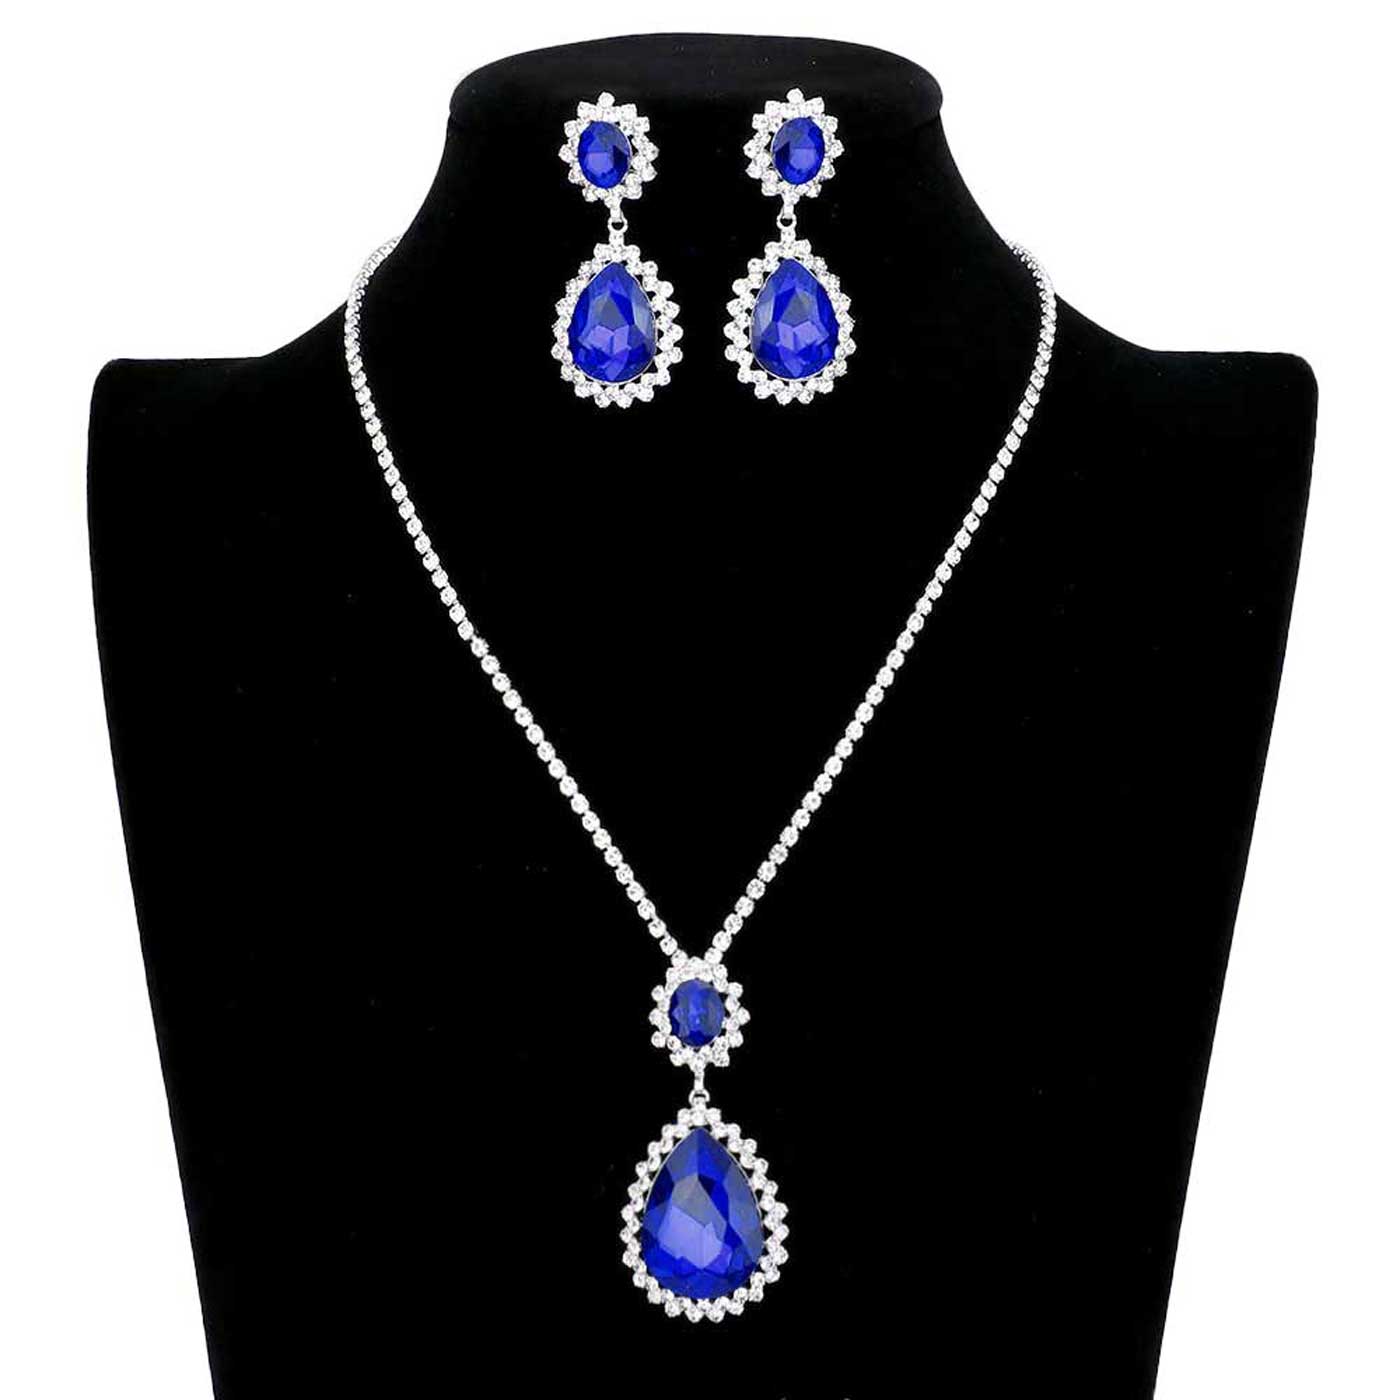 Sapphire Teardrop Accented Rhinestone Necklace. These gorgeous rhinestone pieces will show your class in any special occasion. The elegance of these rhinestone goes unmatched, great for wearing at a party! Perfect jewelry to enhance your look. Awesome gift for birthday, Anniversary, Valentine’s Day or any special occasion.